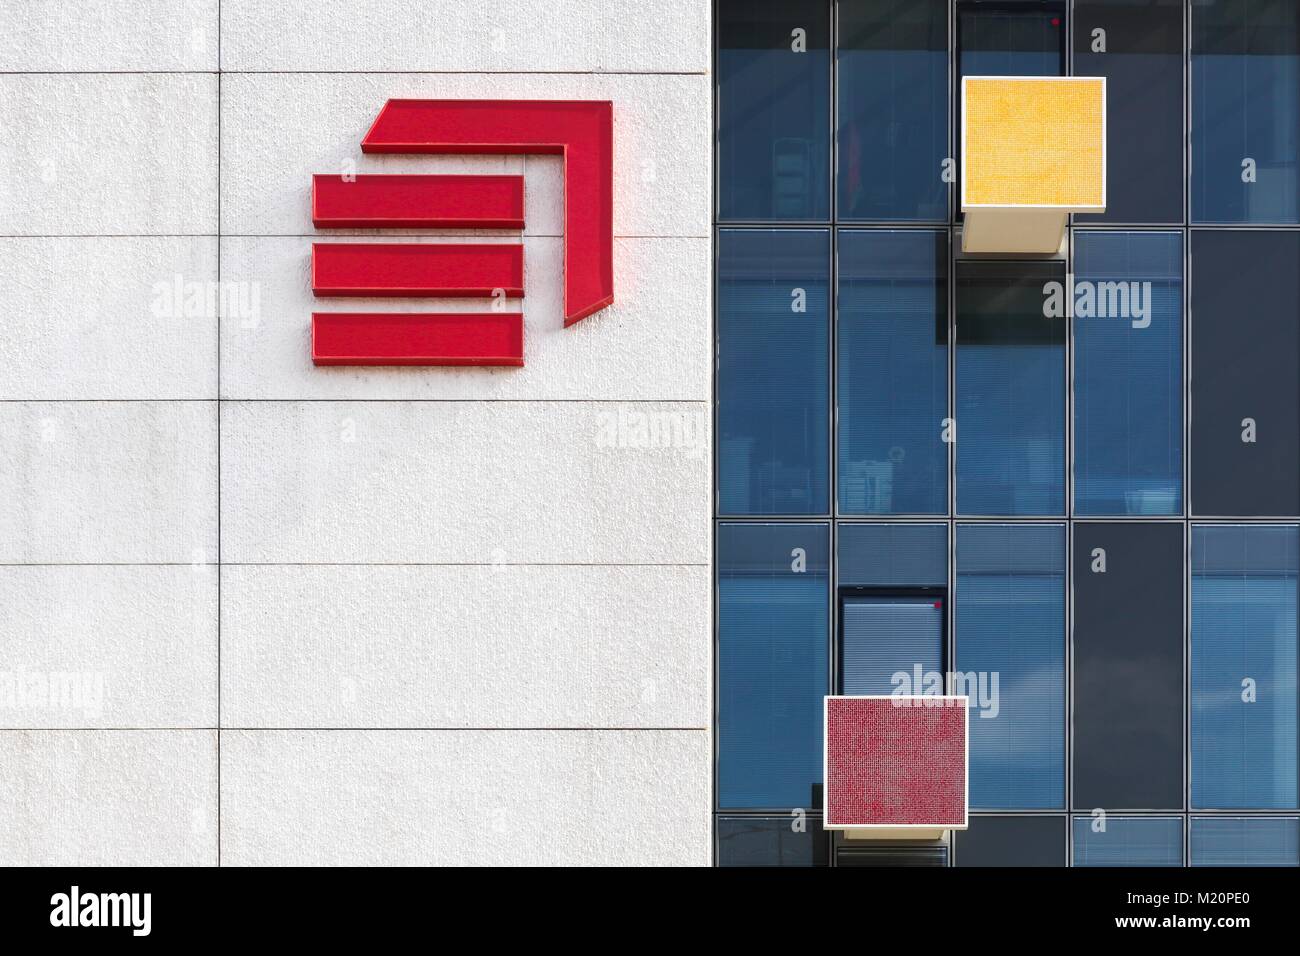 Lyon, France  March 15, 2017: Eiffage office building with the logo of the company on a wall. Eiffage is a French construction company Stock Photo